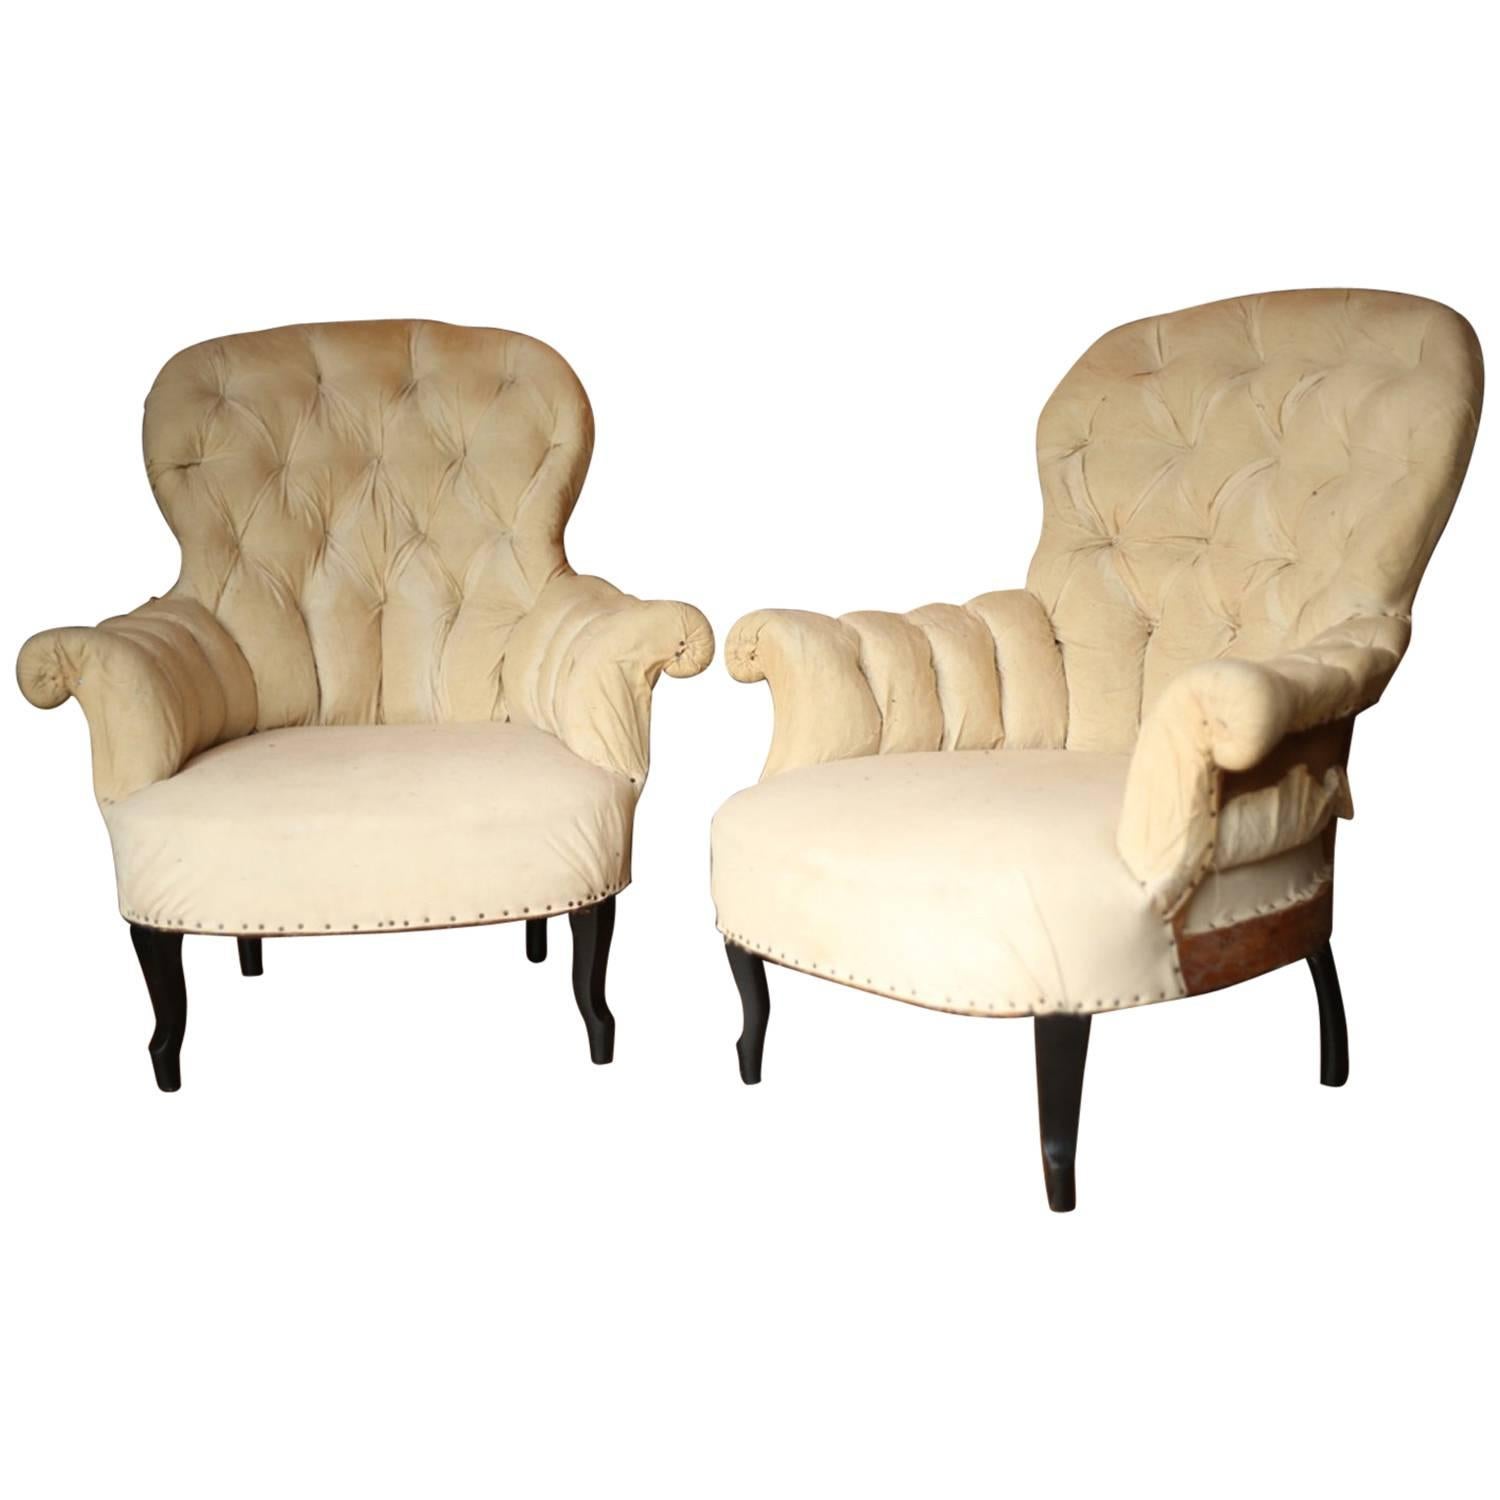 Pair of Napoleon III Buttoned Back Armchairs